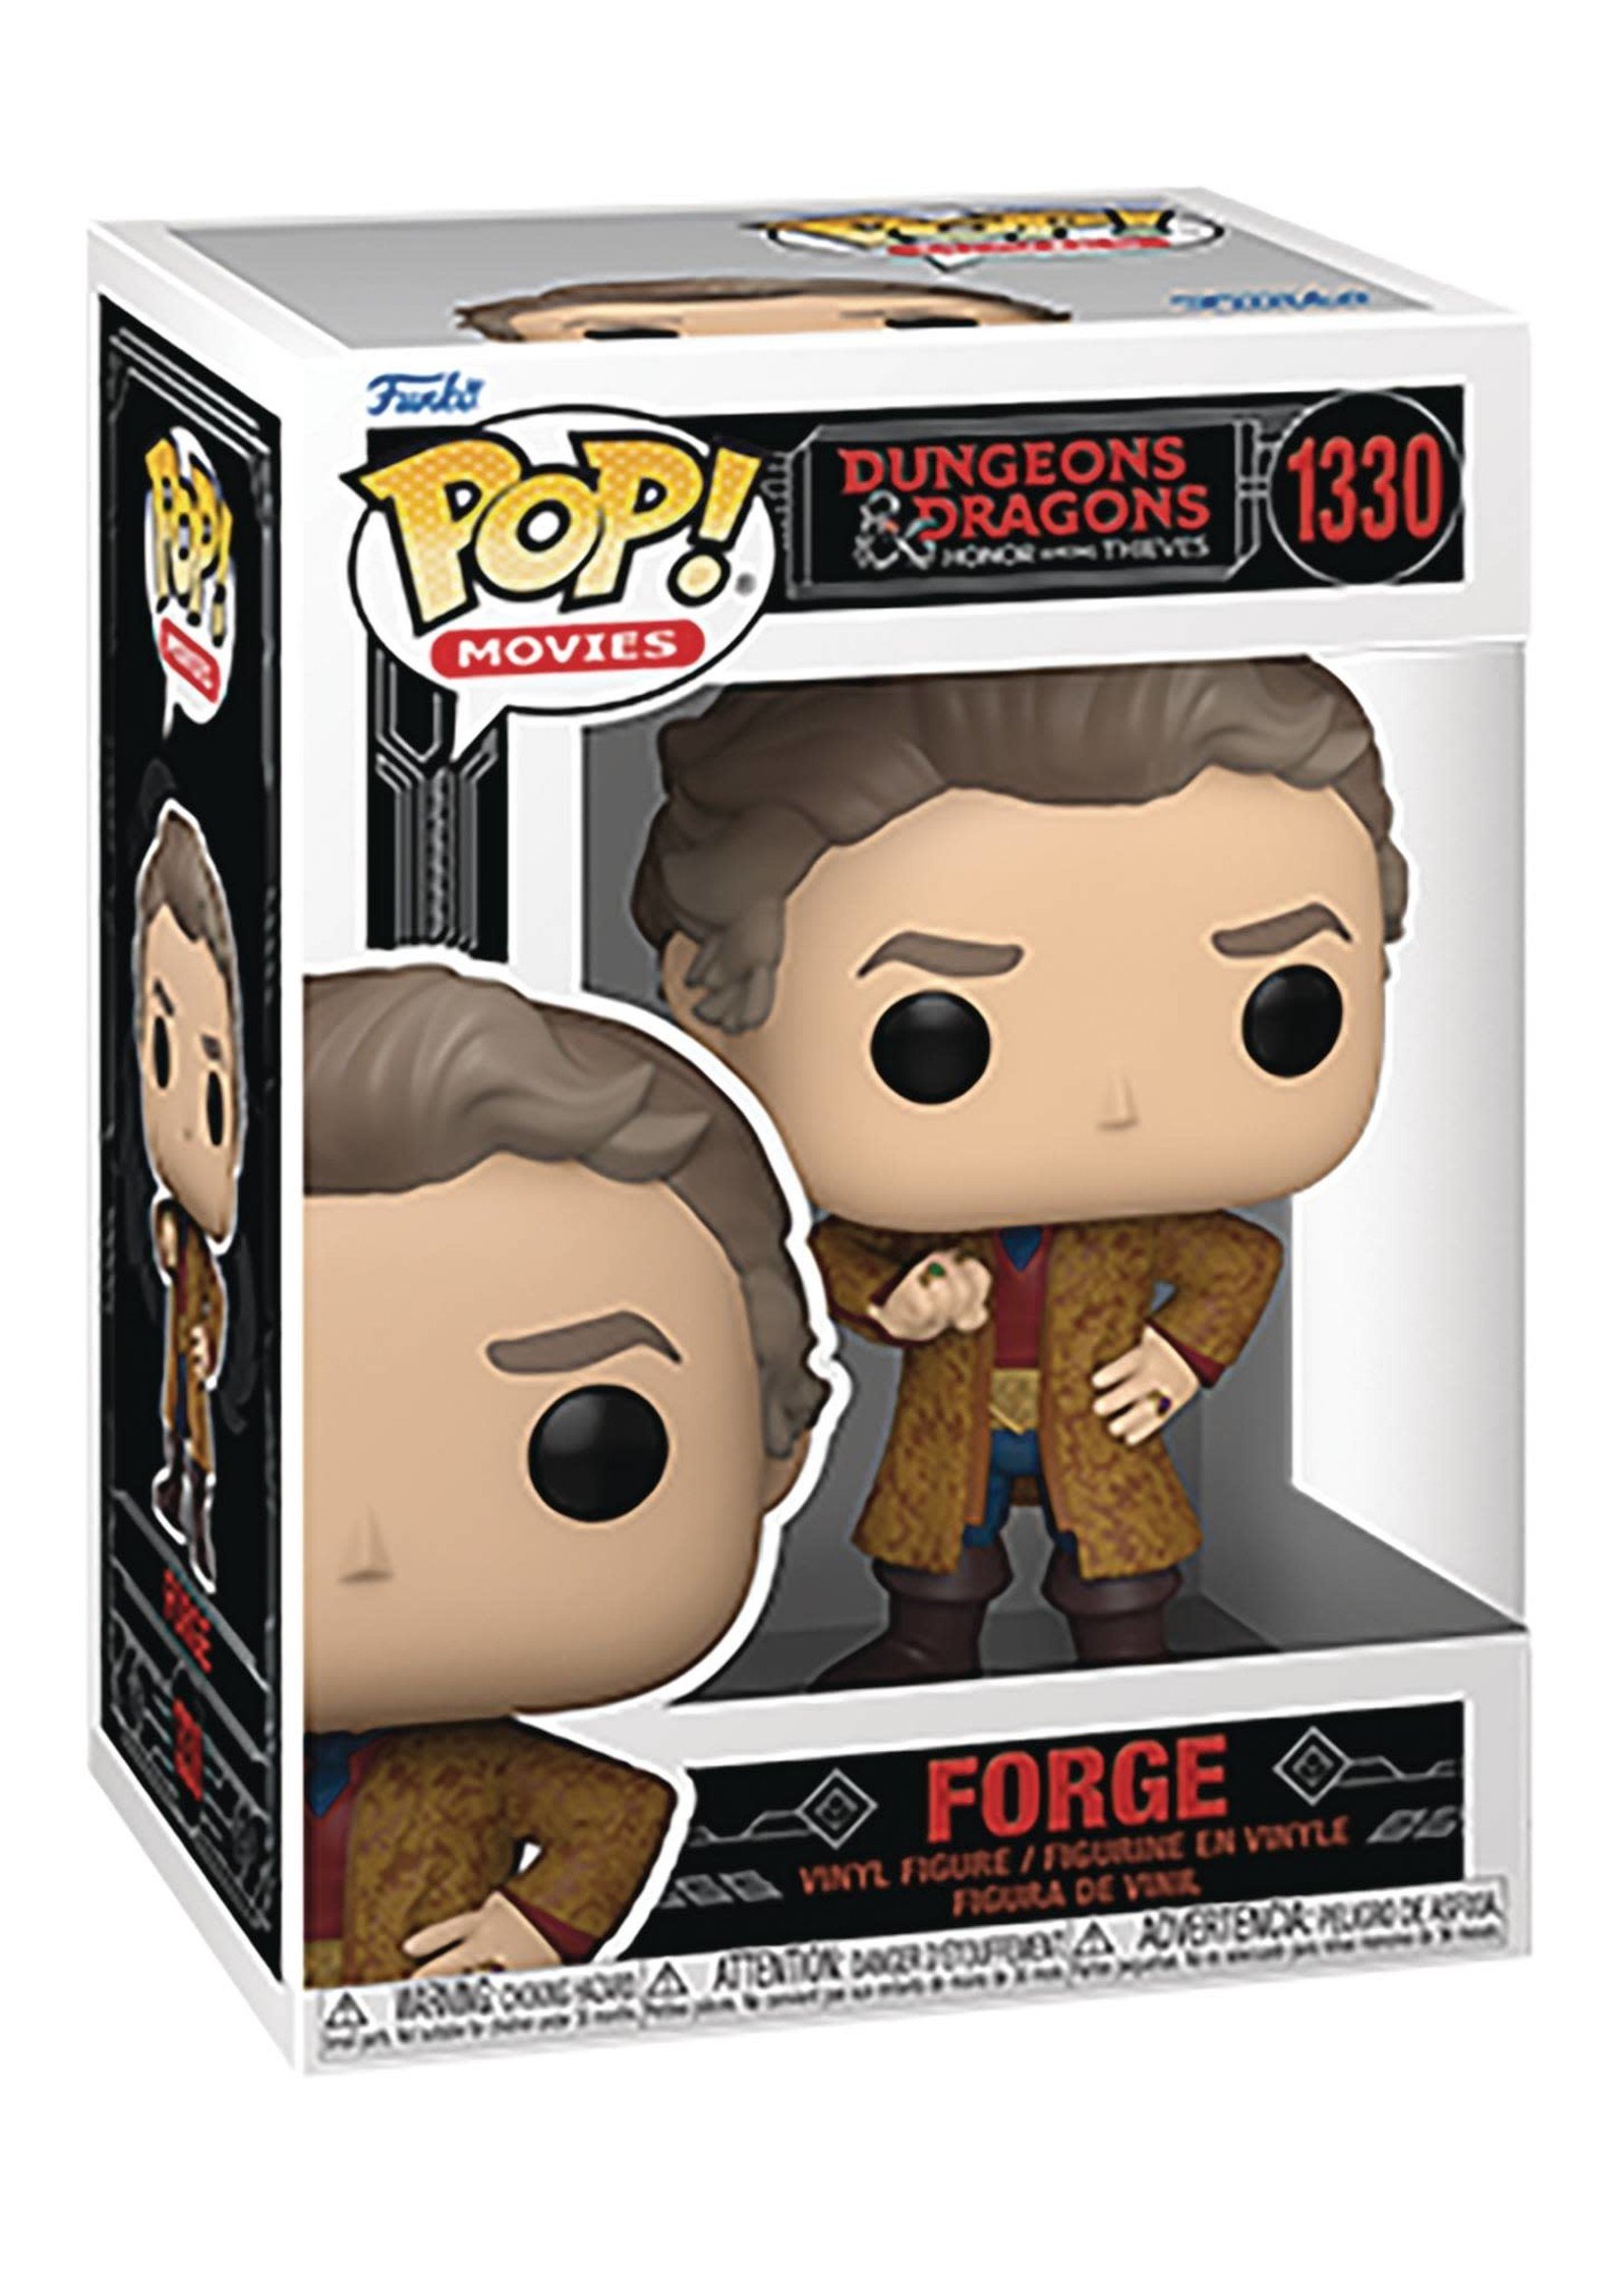 POP MOVIES DUNGEONS & DRAGONS 2023 FORGE VINYL FIG